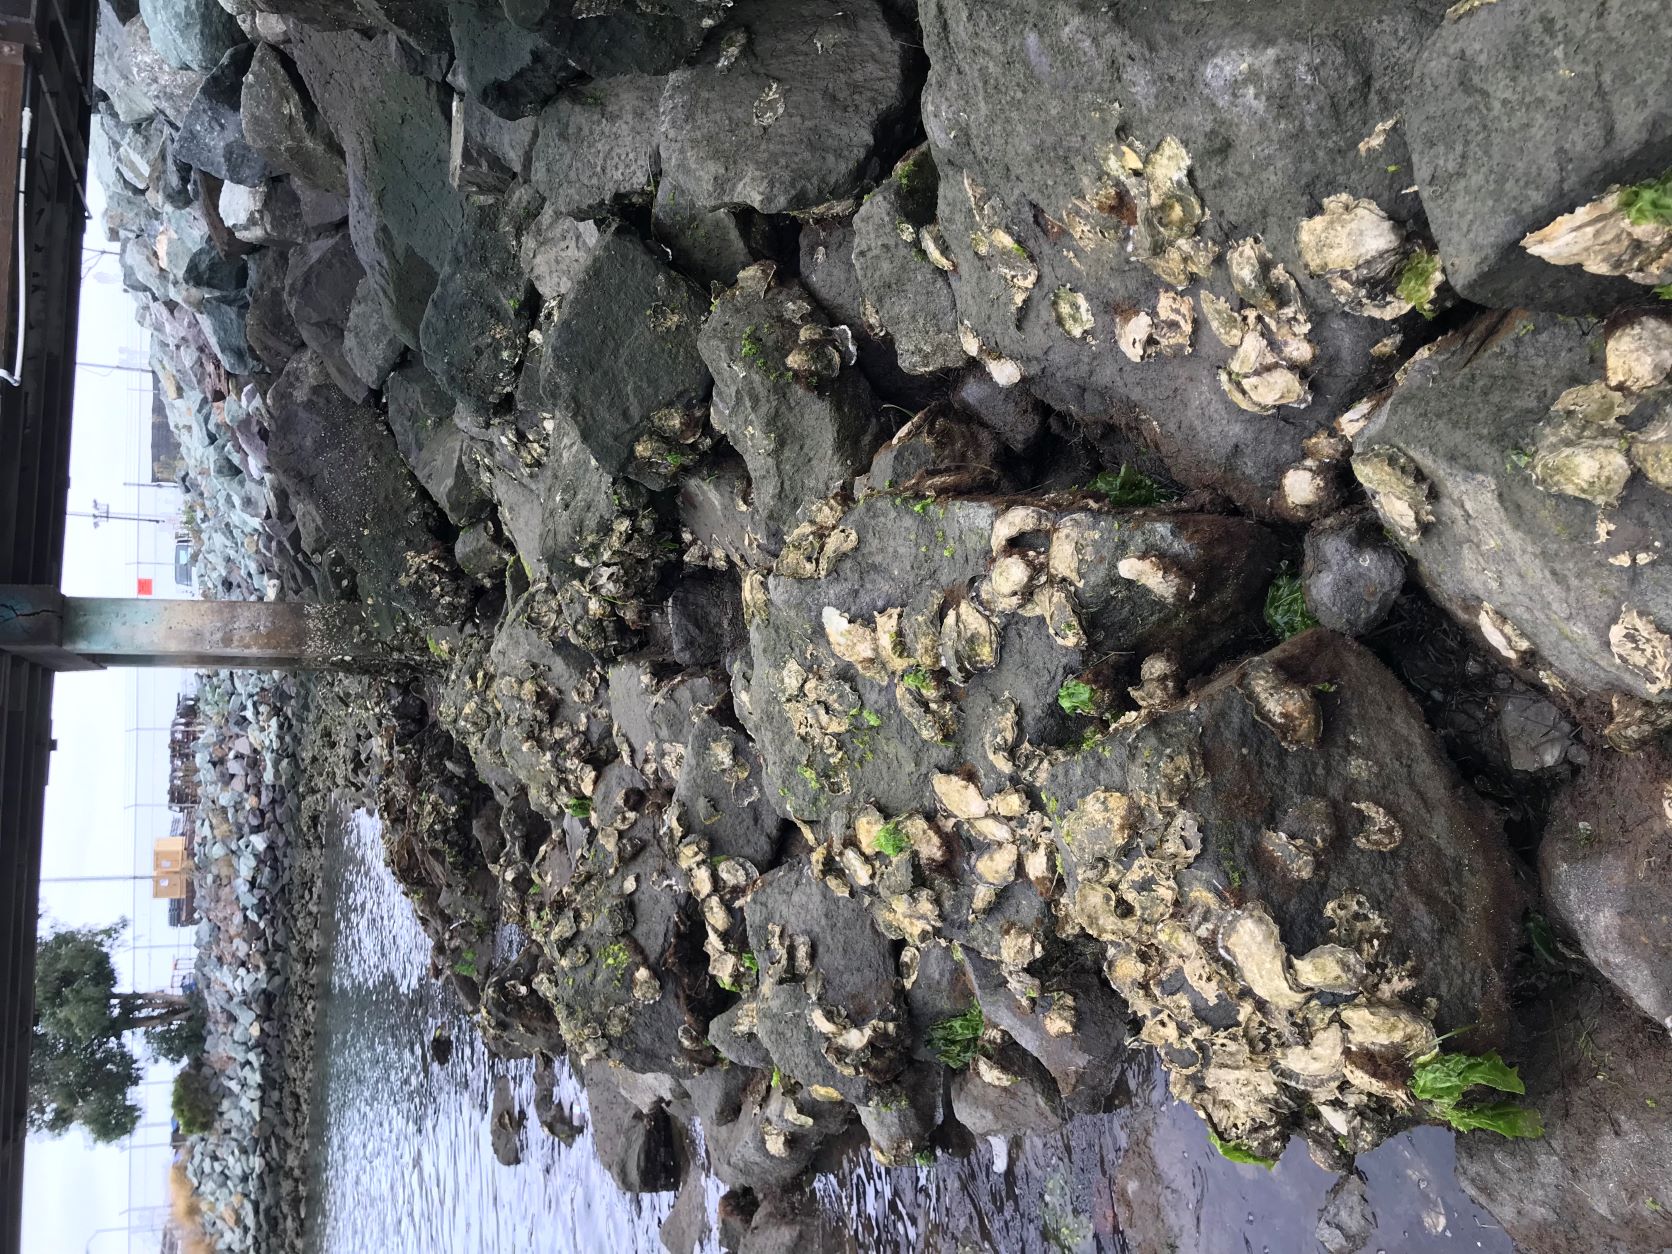 Large rocks line the coast, with oysters attached.